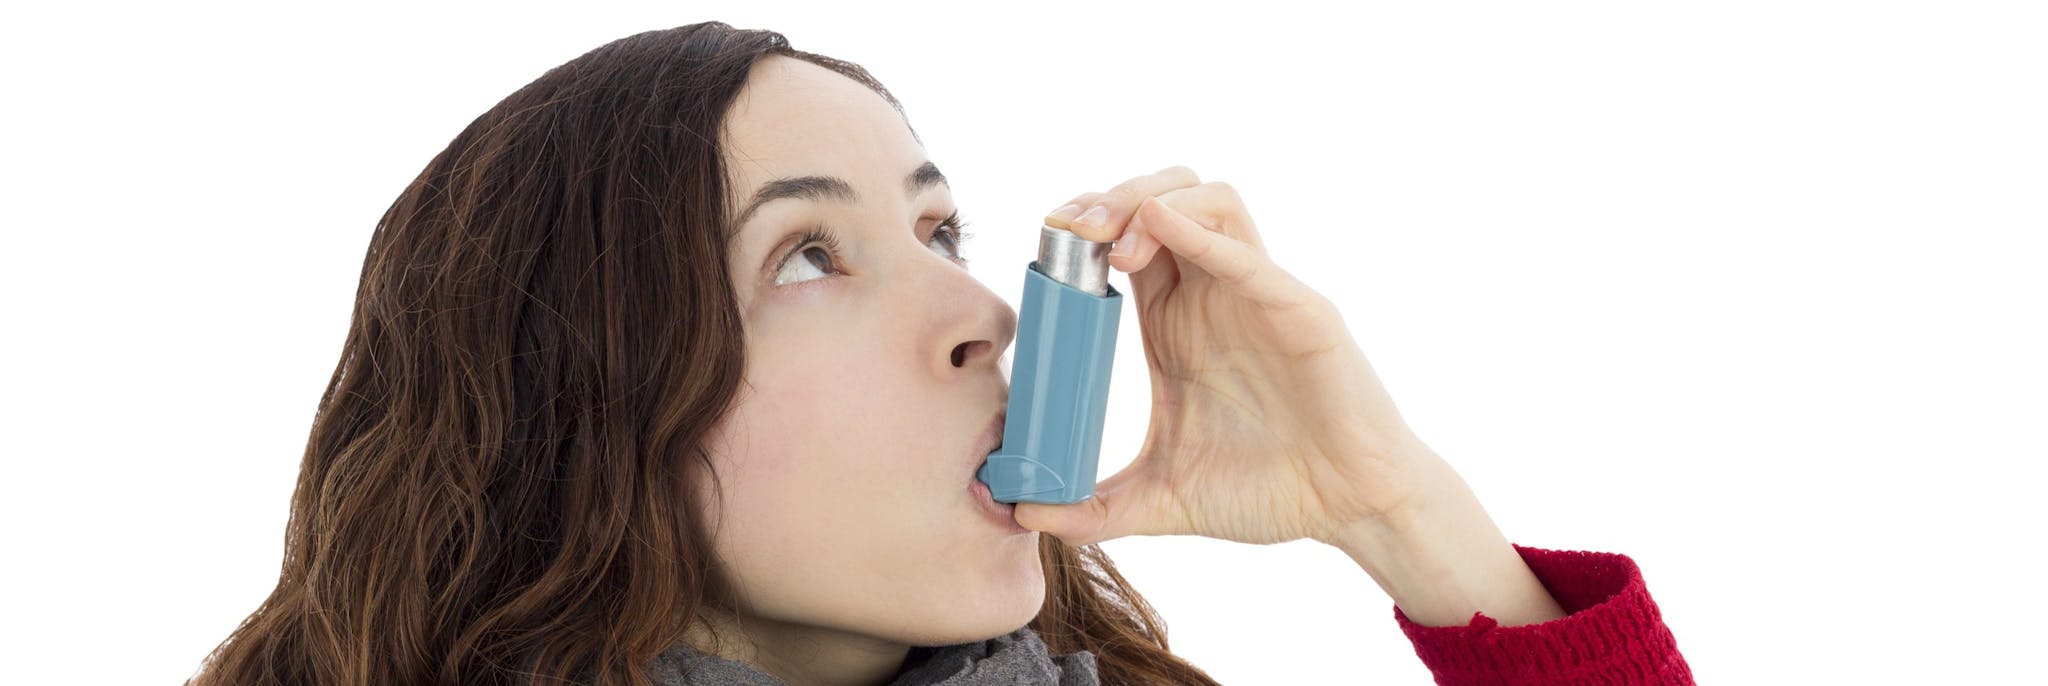 Managing Your Childs Asthma